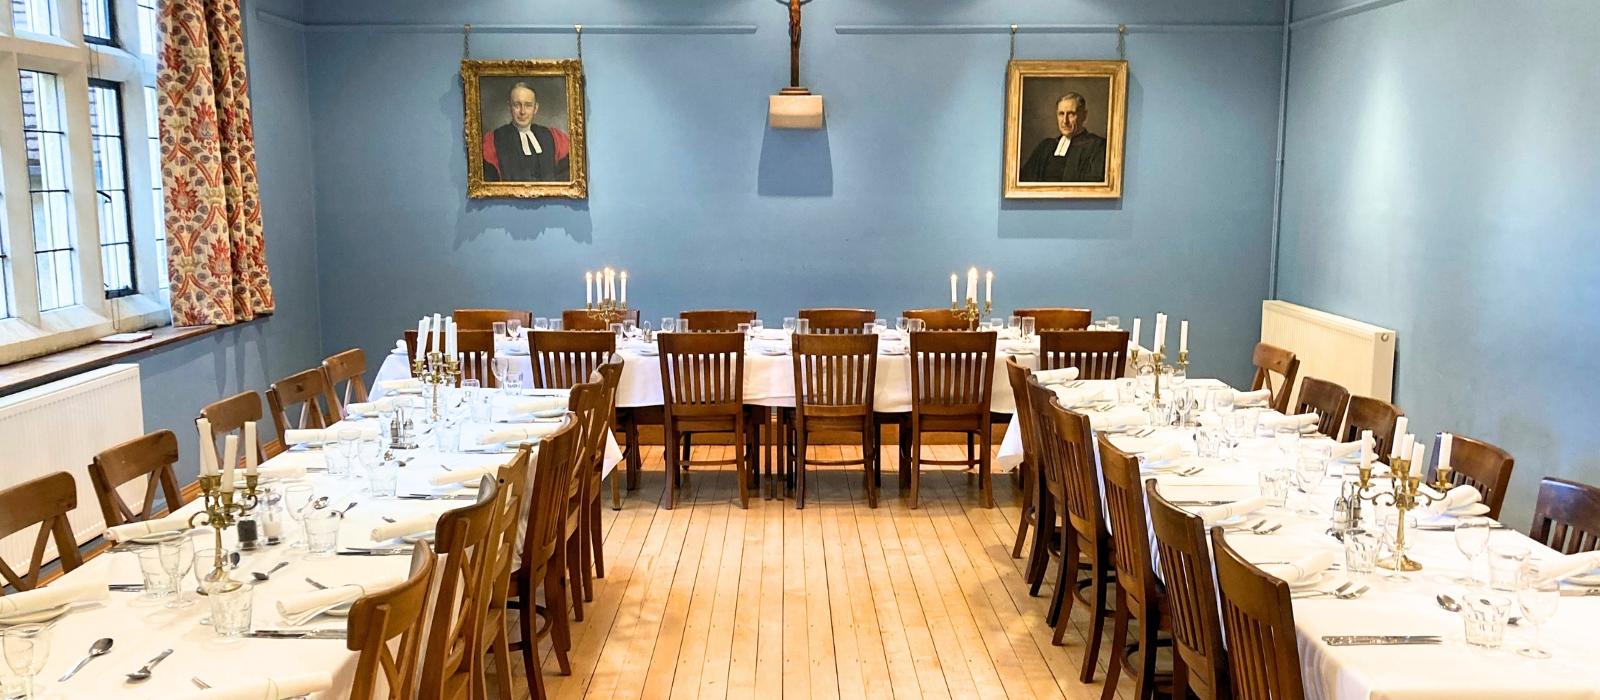 Dining Room, St Stephen's House